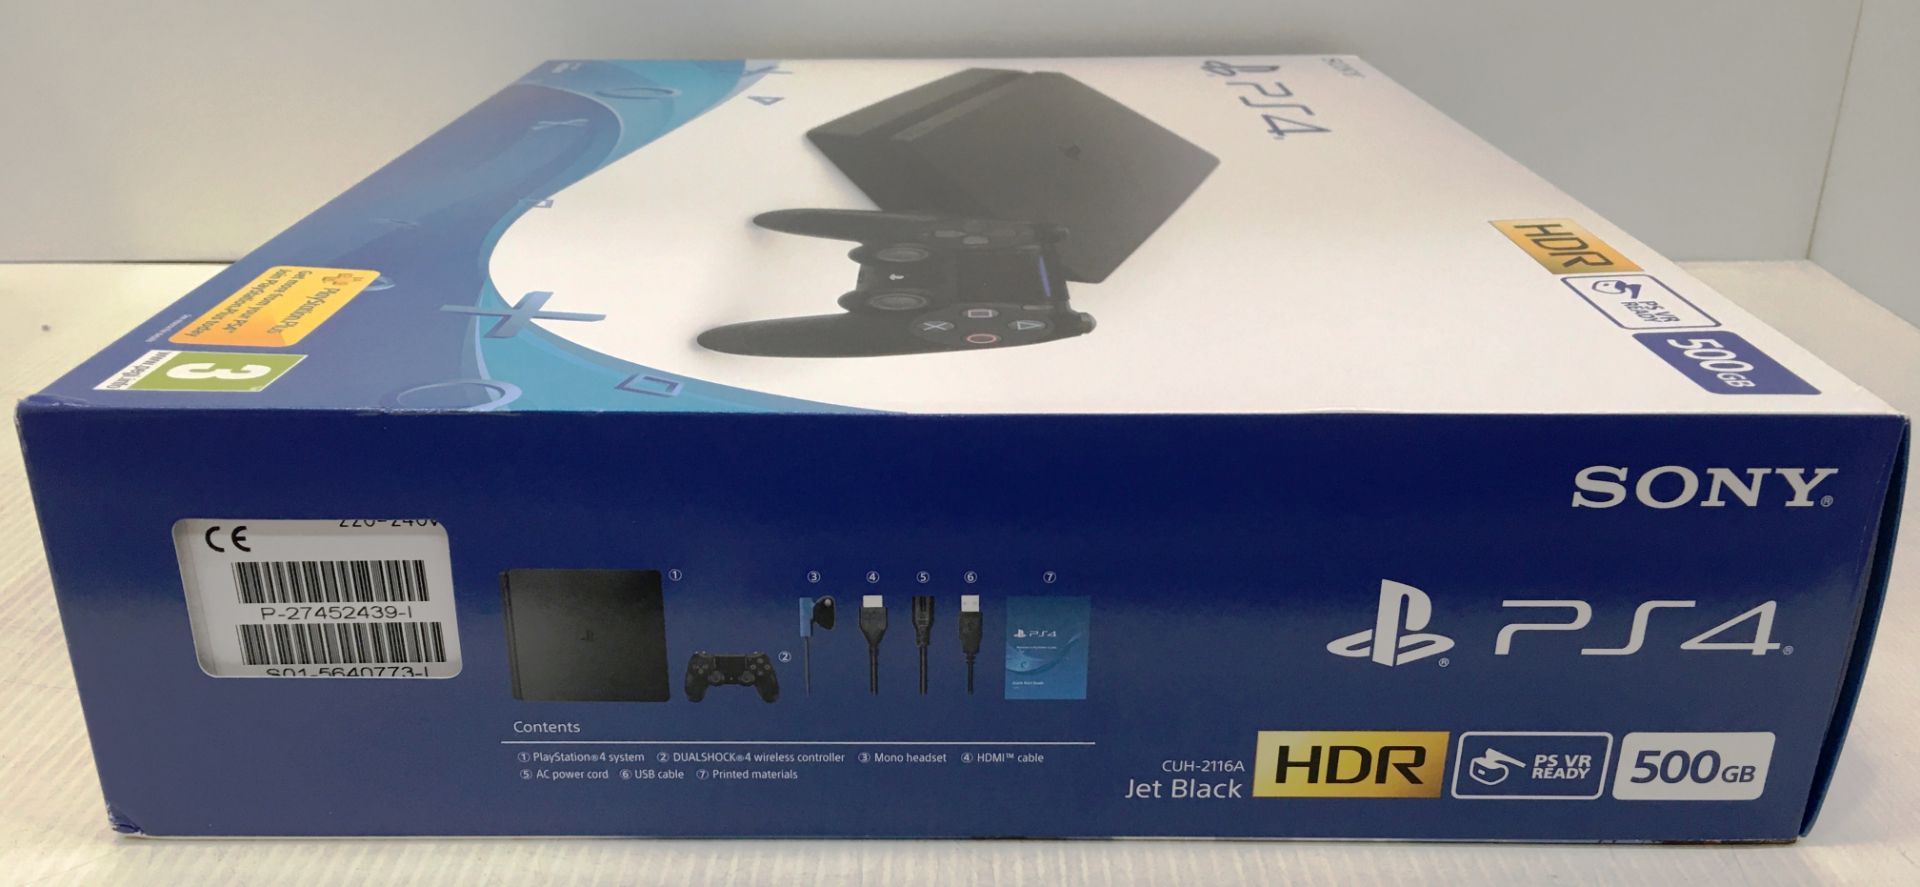 A Sony Playstation 4 500GB jet black gaming console (boxed) complete with Wipeout game and original - Image 2 of 3